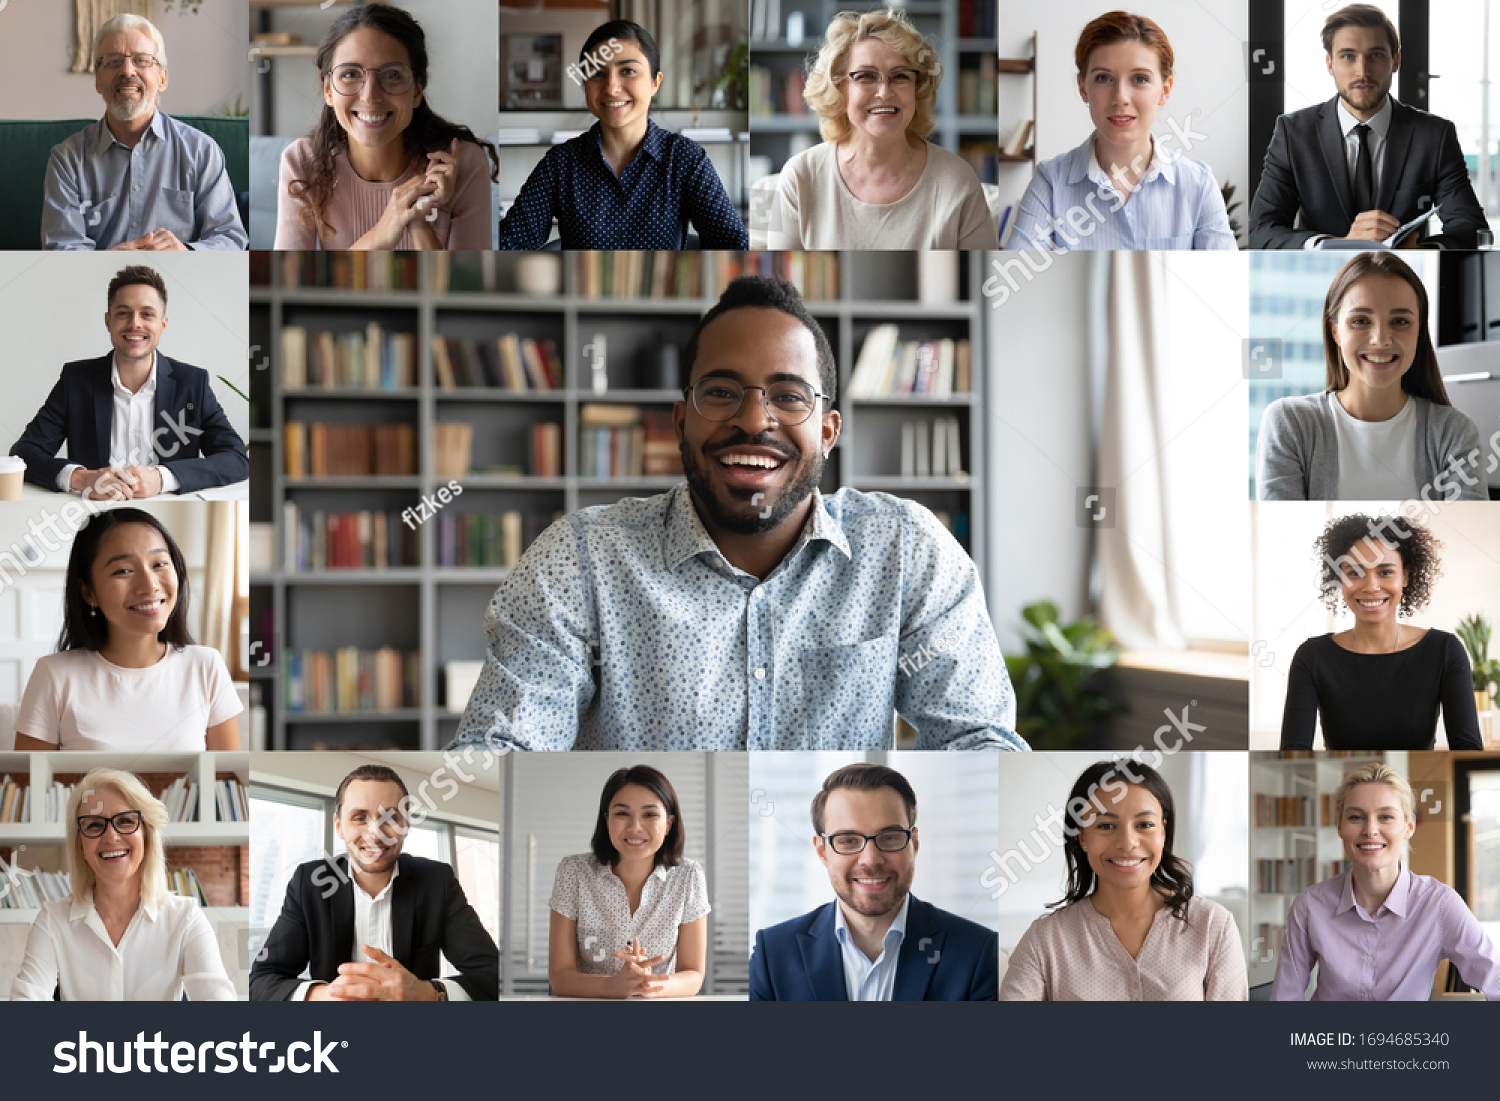 Many portraits faces of diverse young and aged people webcam view, while engaged in videoconference on-line meeting lead by african businessman leader. Group video call application easy usage concept #1694685340